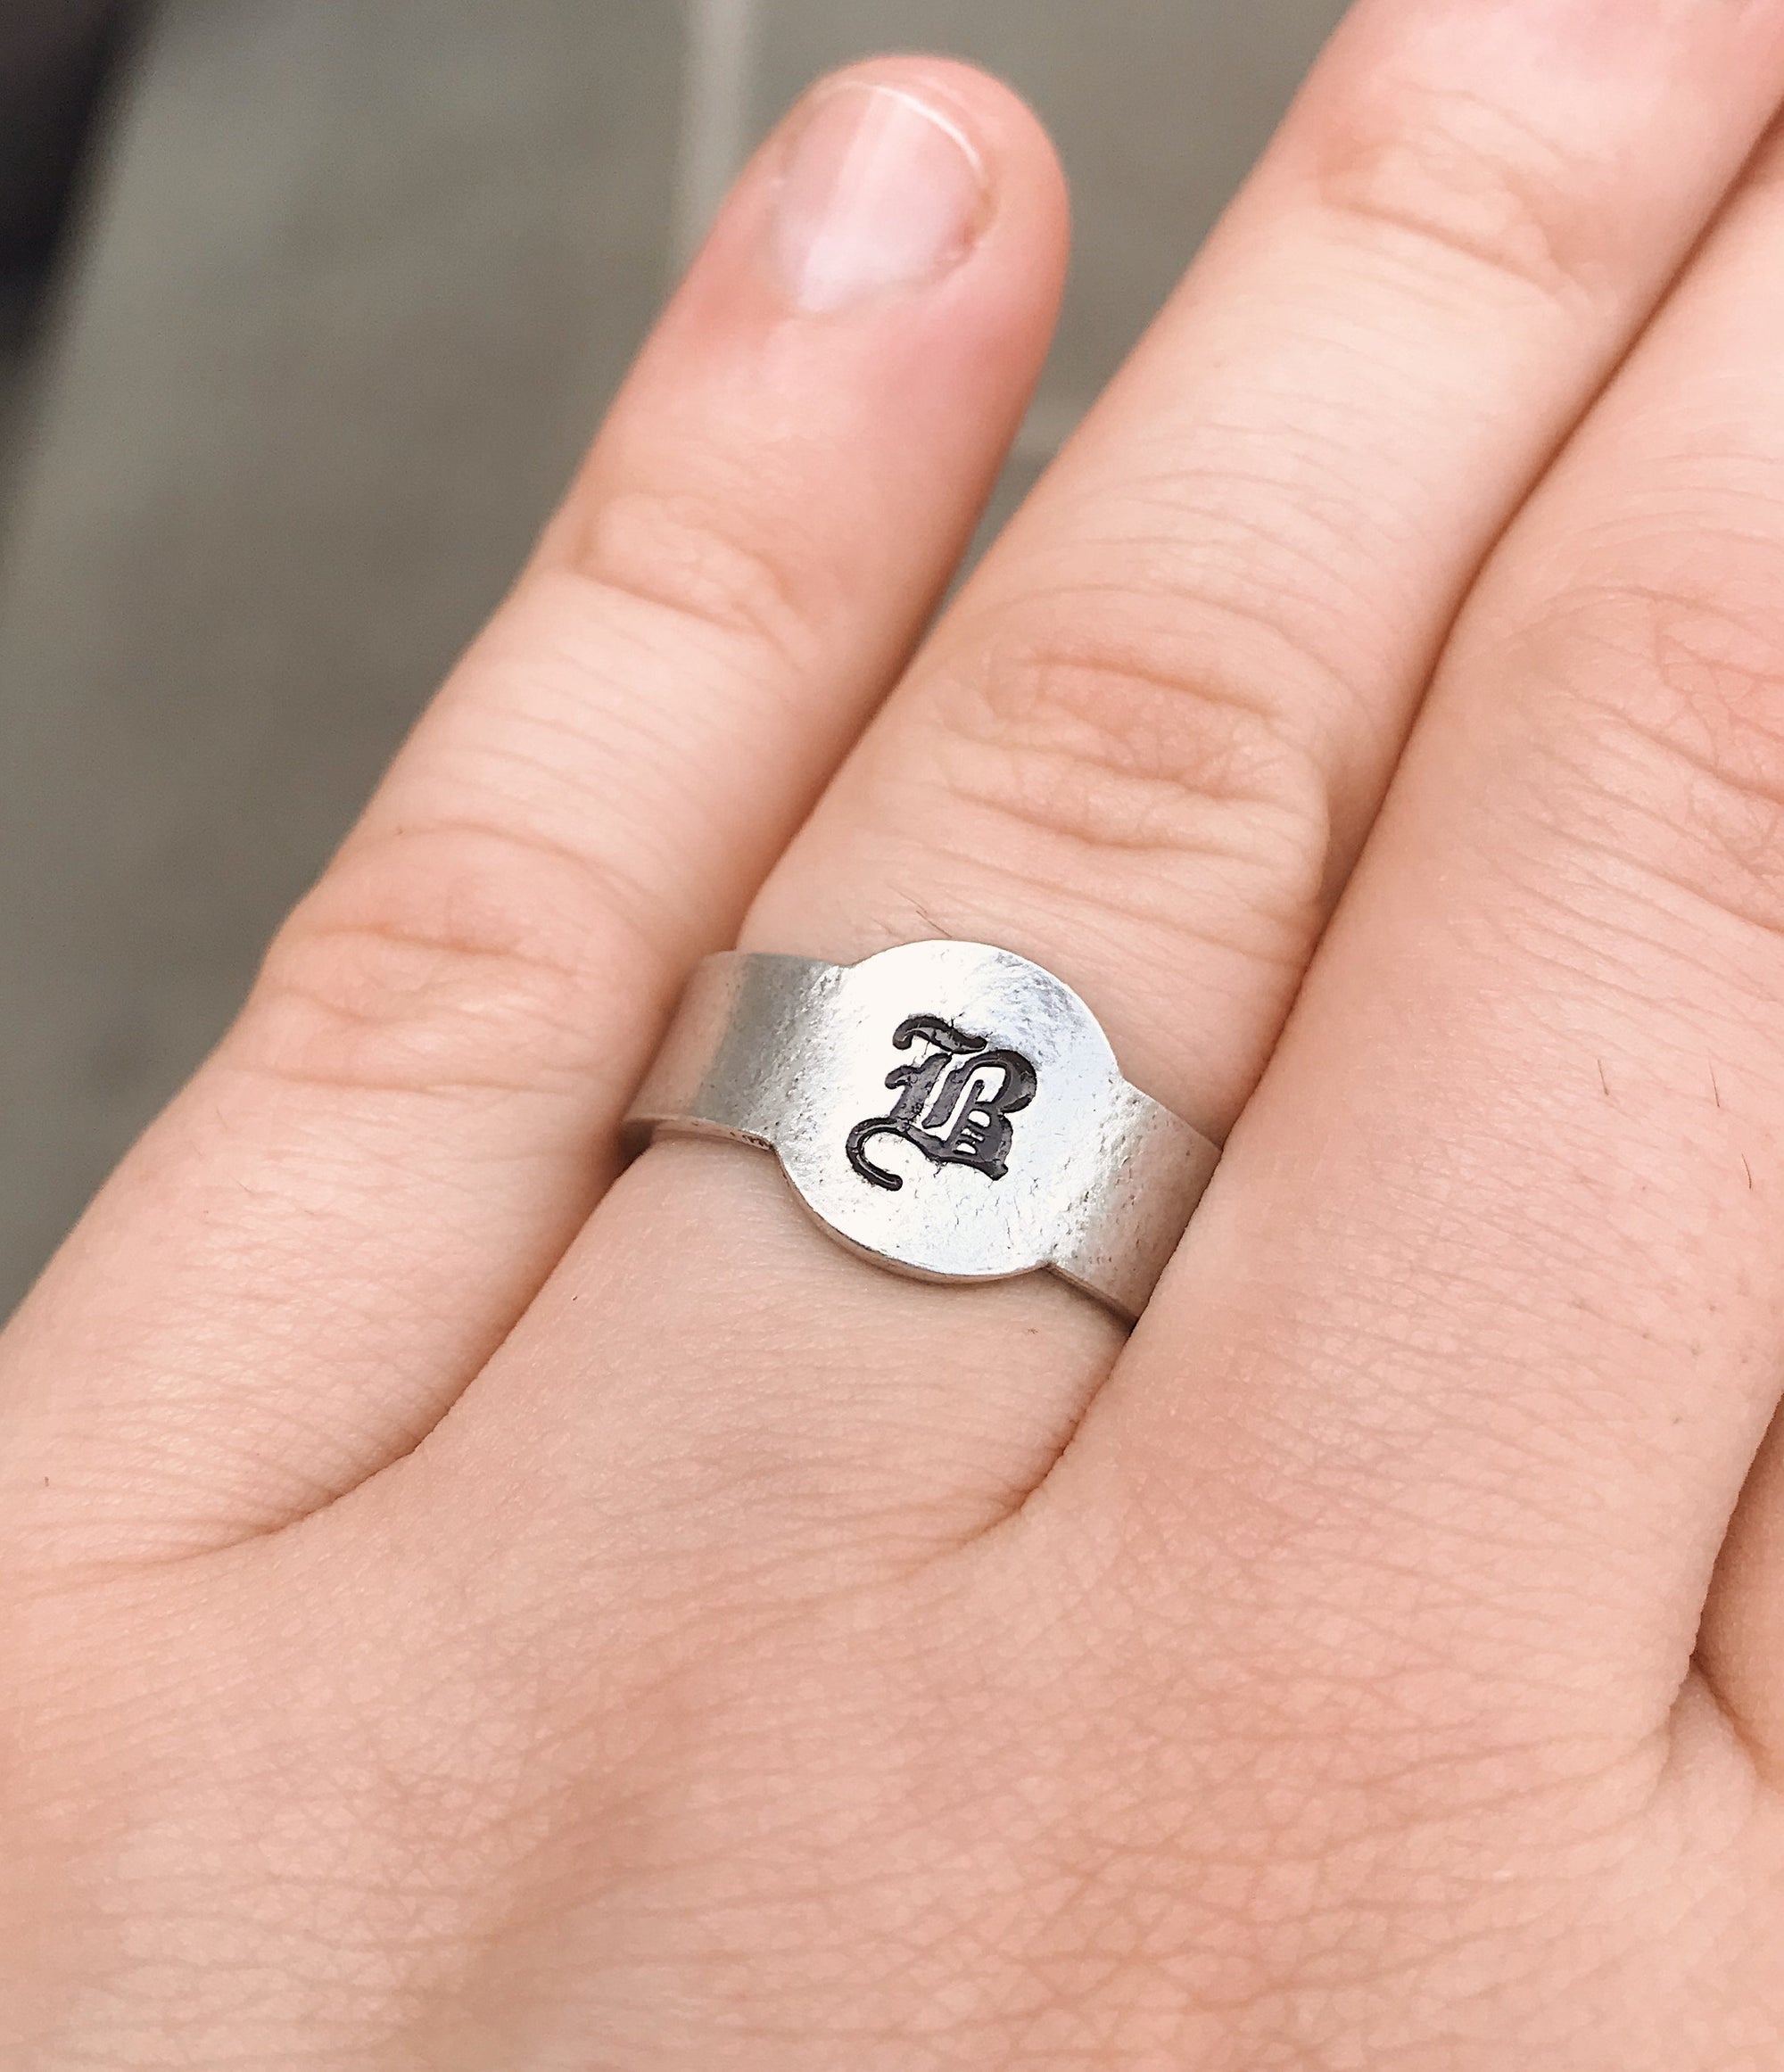 Signet Ring | Initial Stamped Signet Ring | Personalized Initial Ring | Silver Signet Ring | Jewelry Initial Ring | Custom Signet Ring